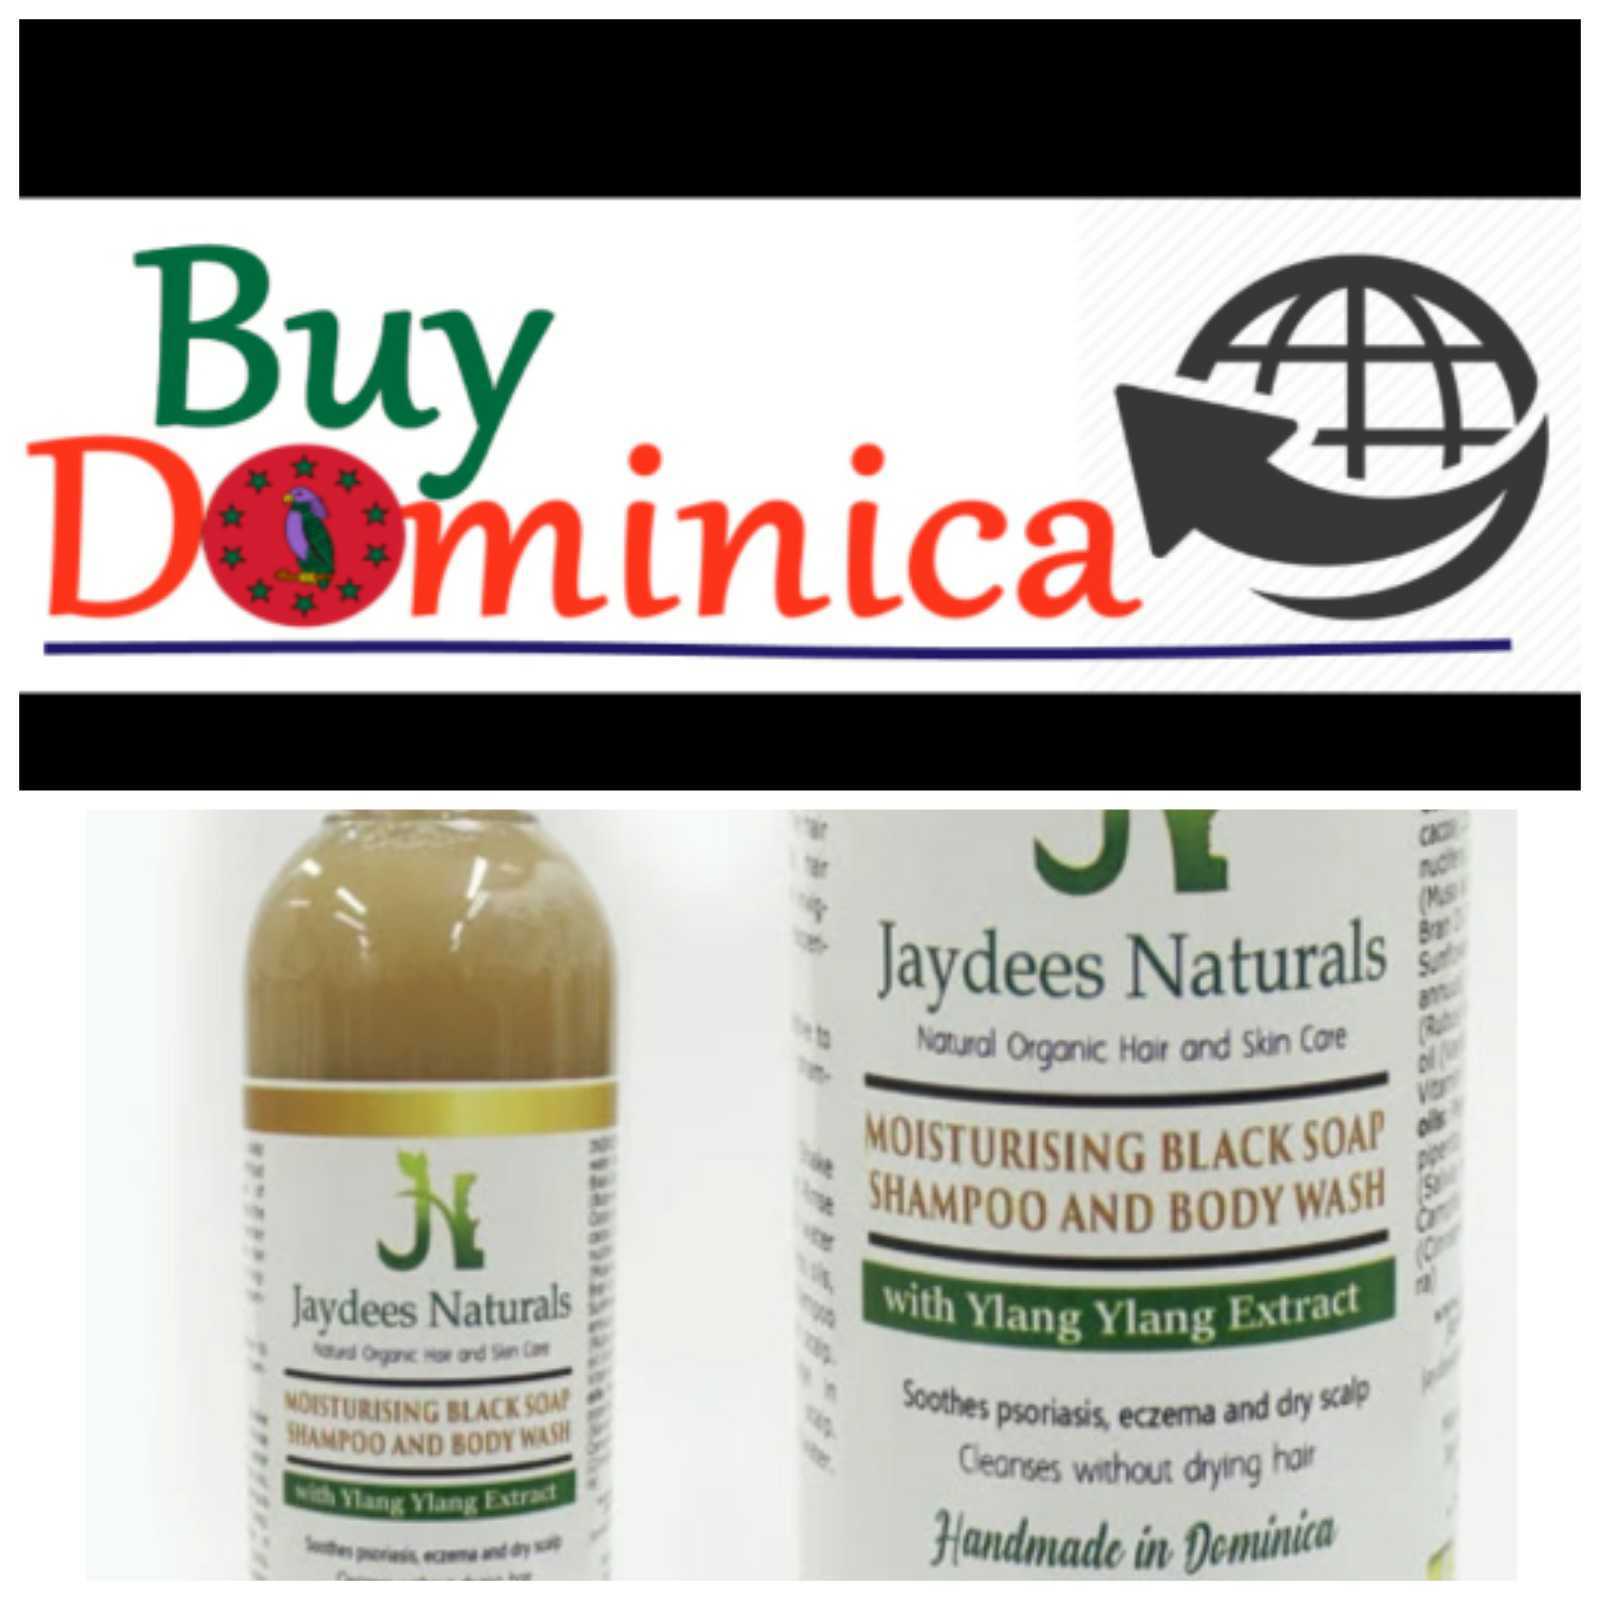 New North America Website Launched Exclusively for Dominica Products 